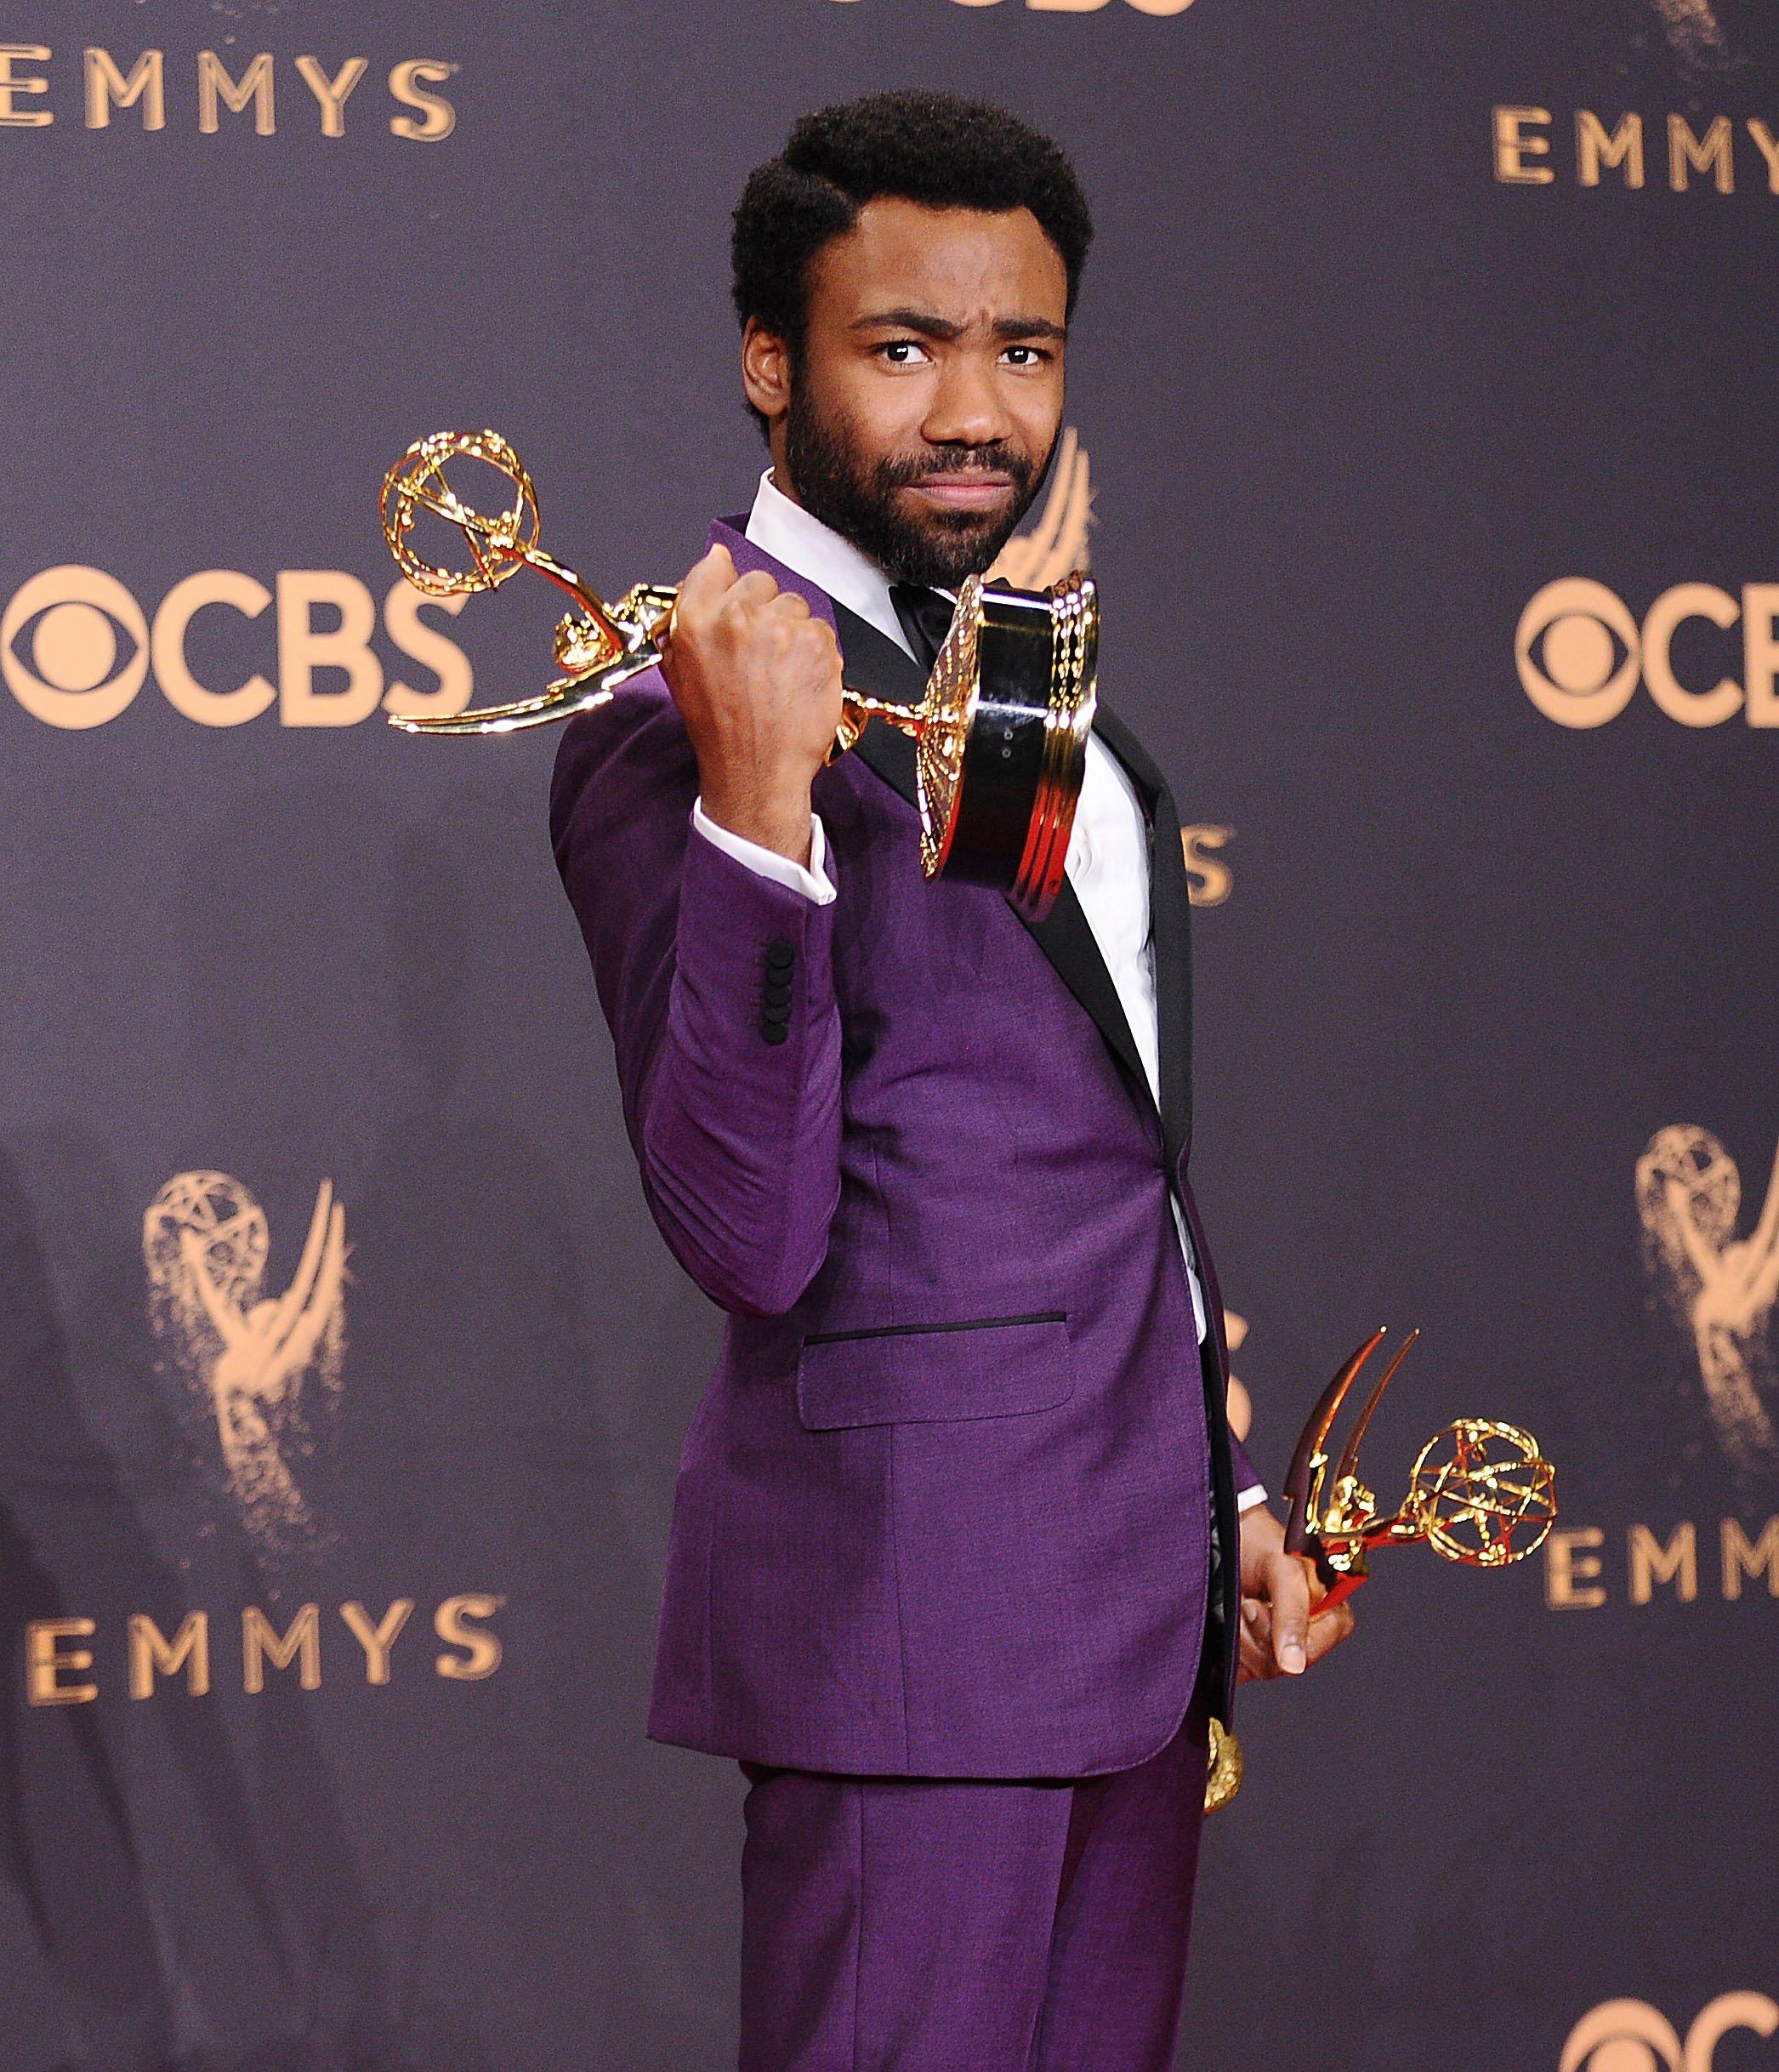 Donald Glover at the 2017 Emmy Awards